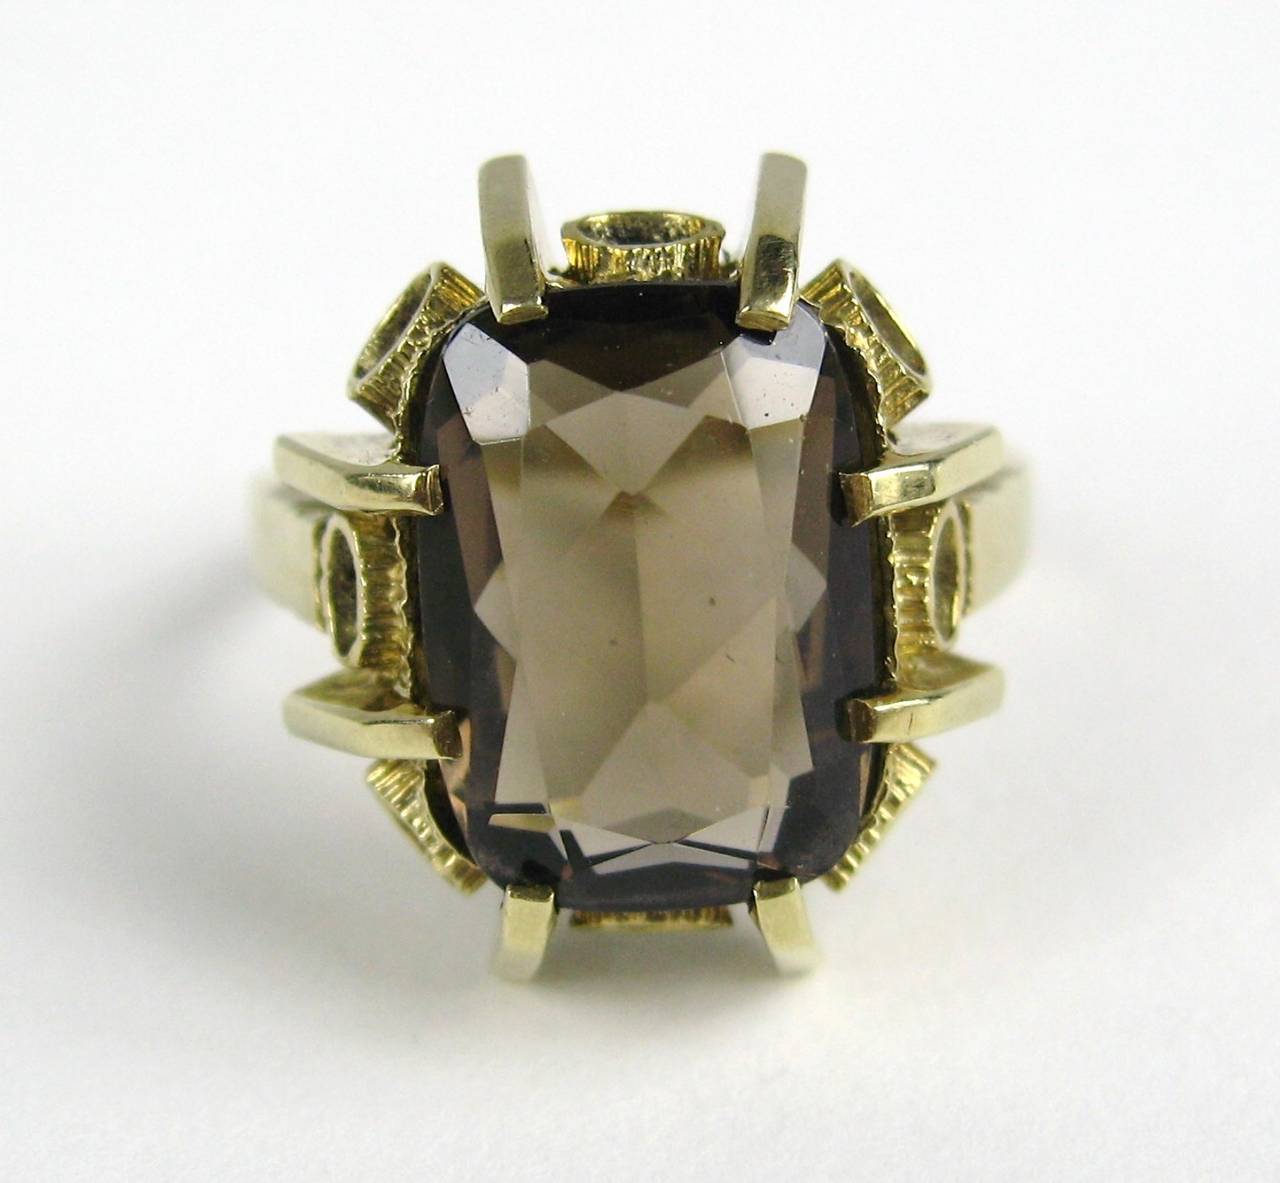 Lovely Mid Century Smokey Quartz Ring with Large Prong detailing. Ring Measures .77